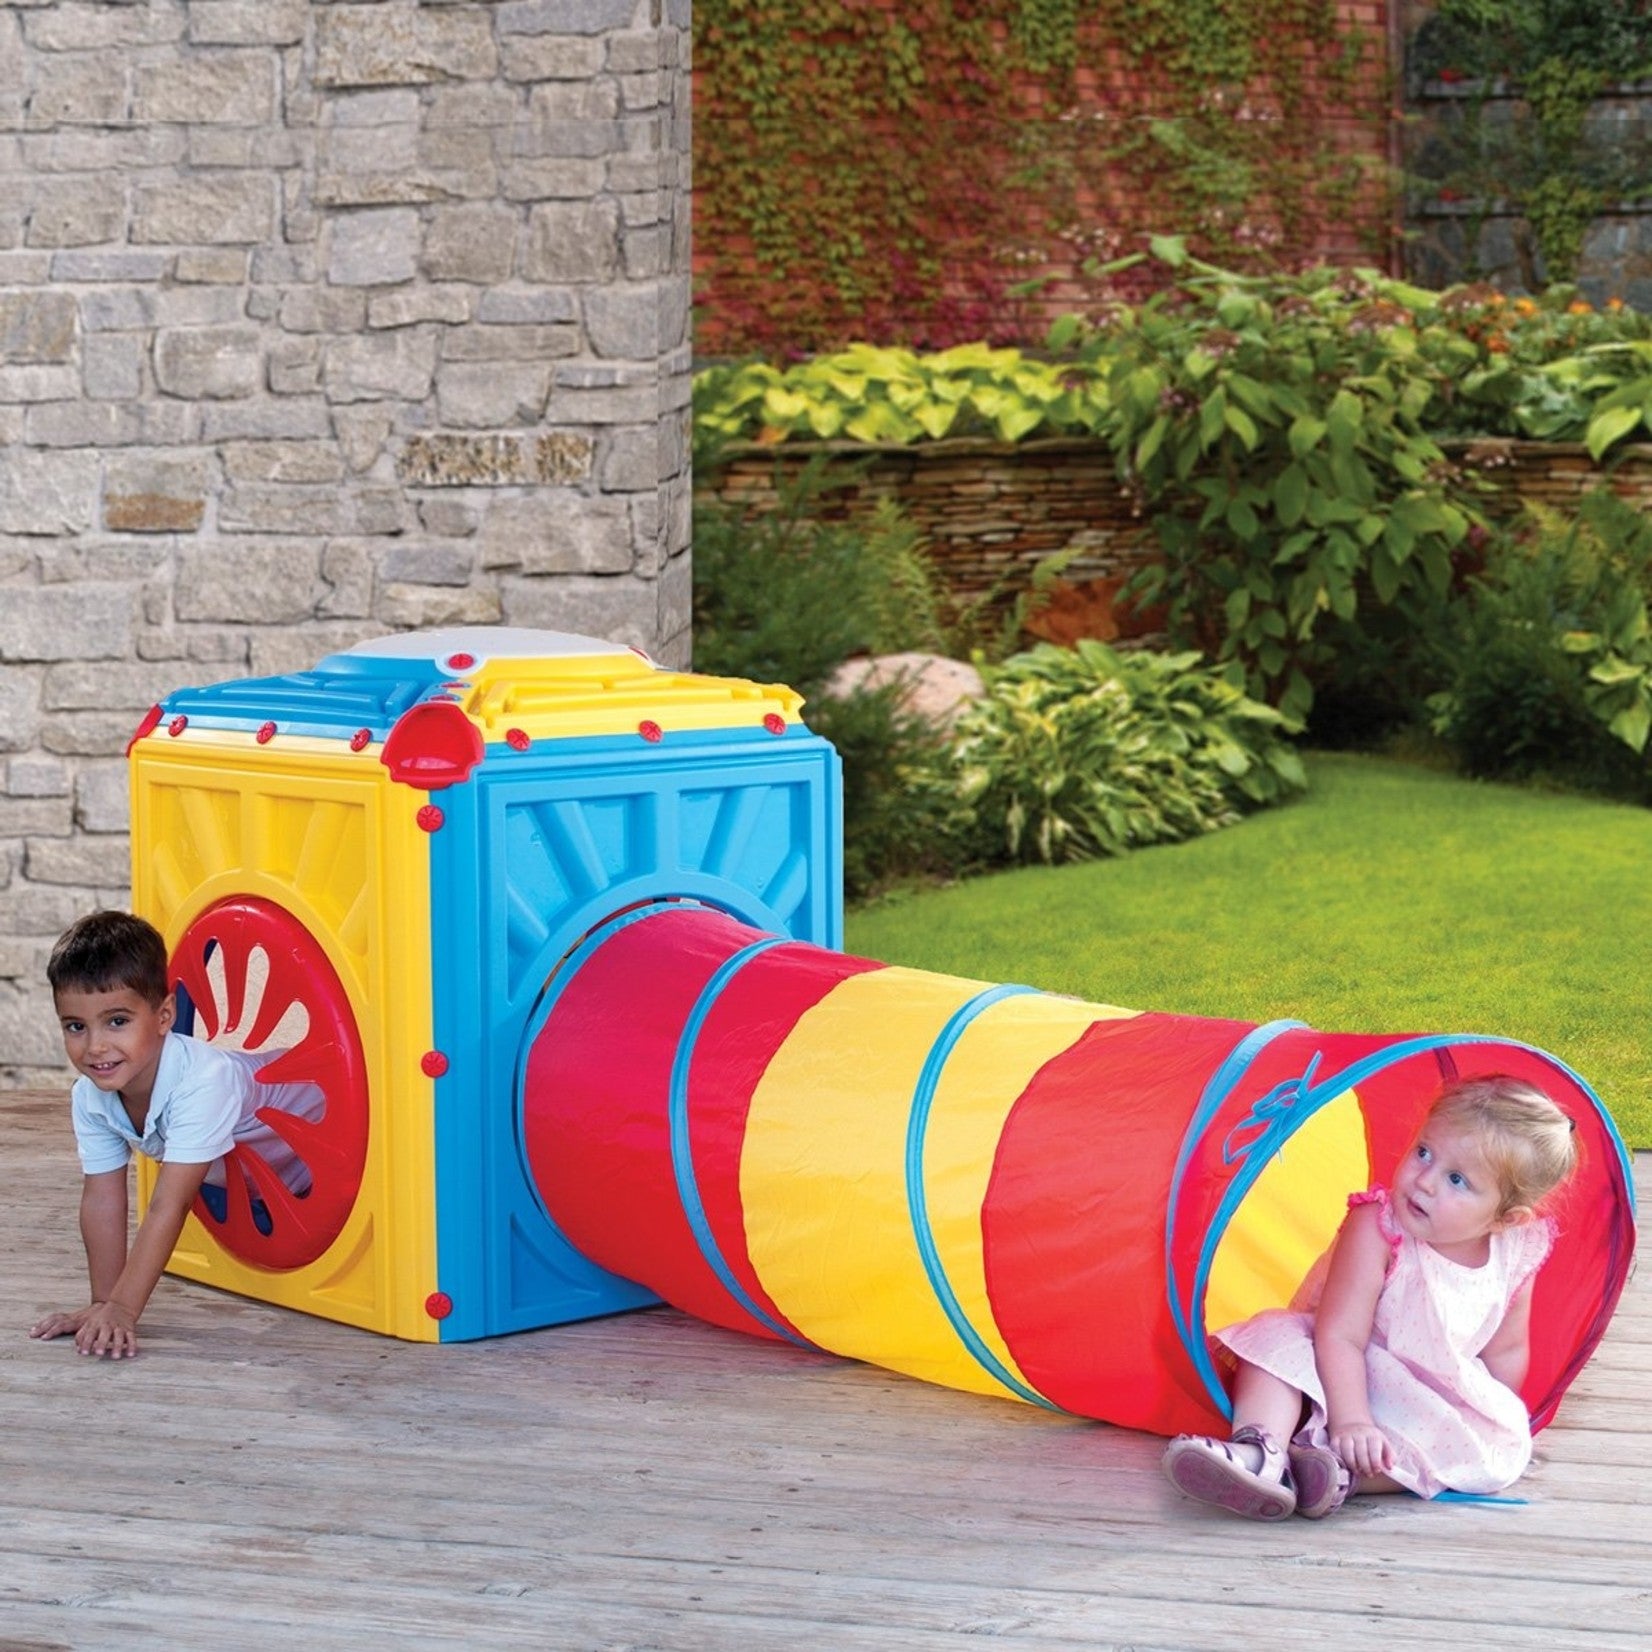 Starplay Activity Cube with Tunnel - Outdoor Playset for Kids